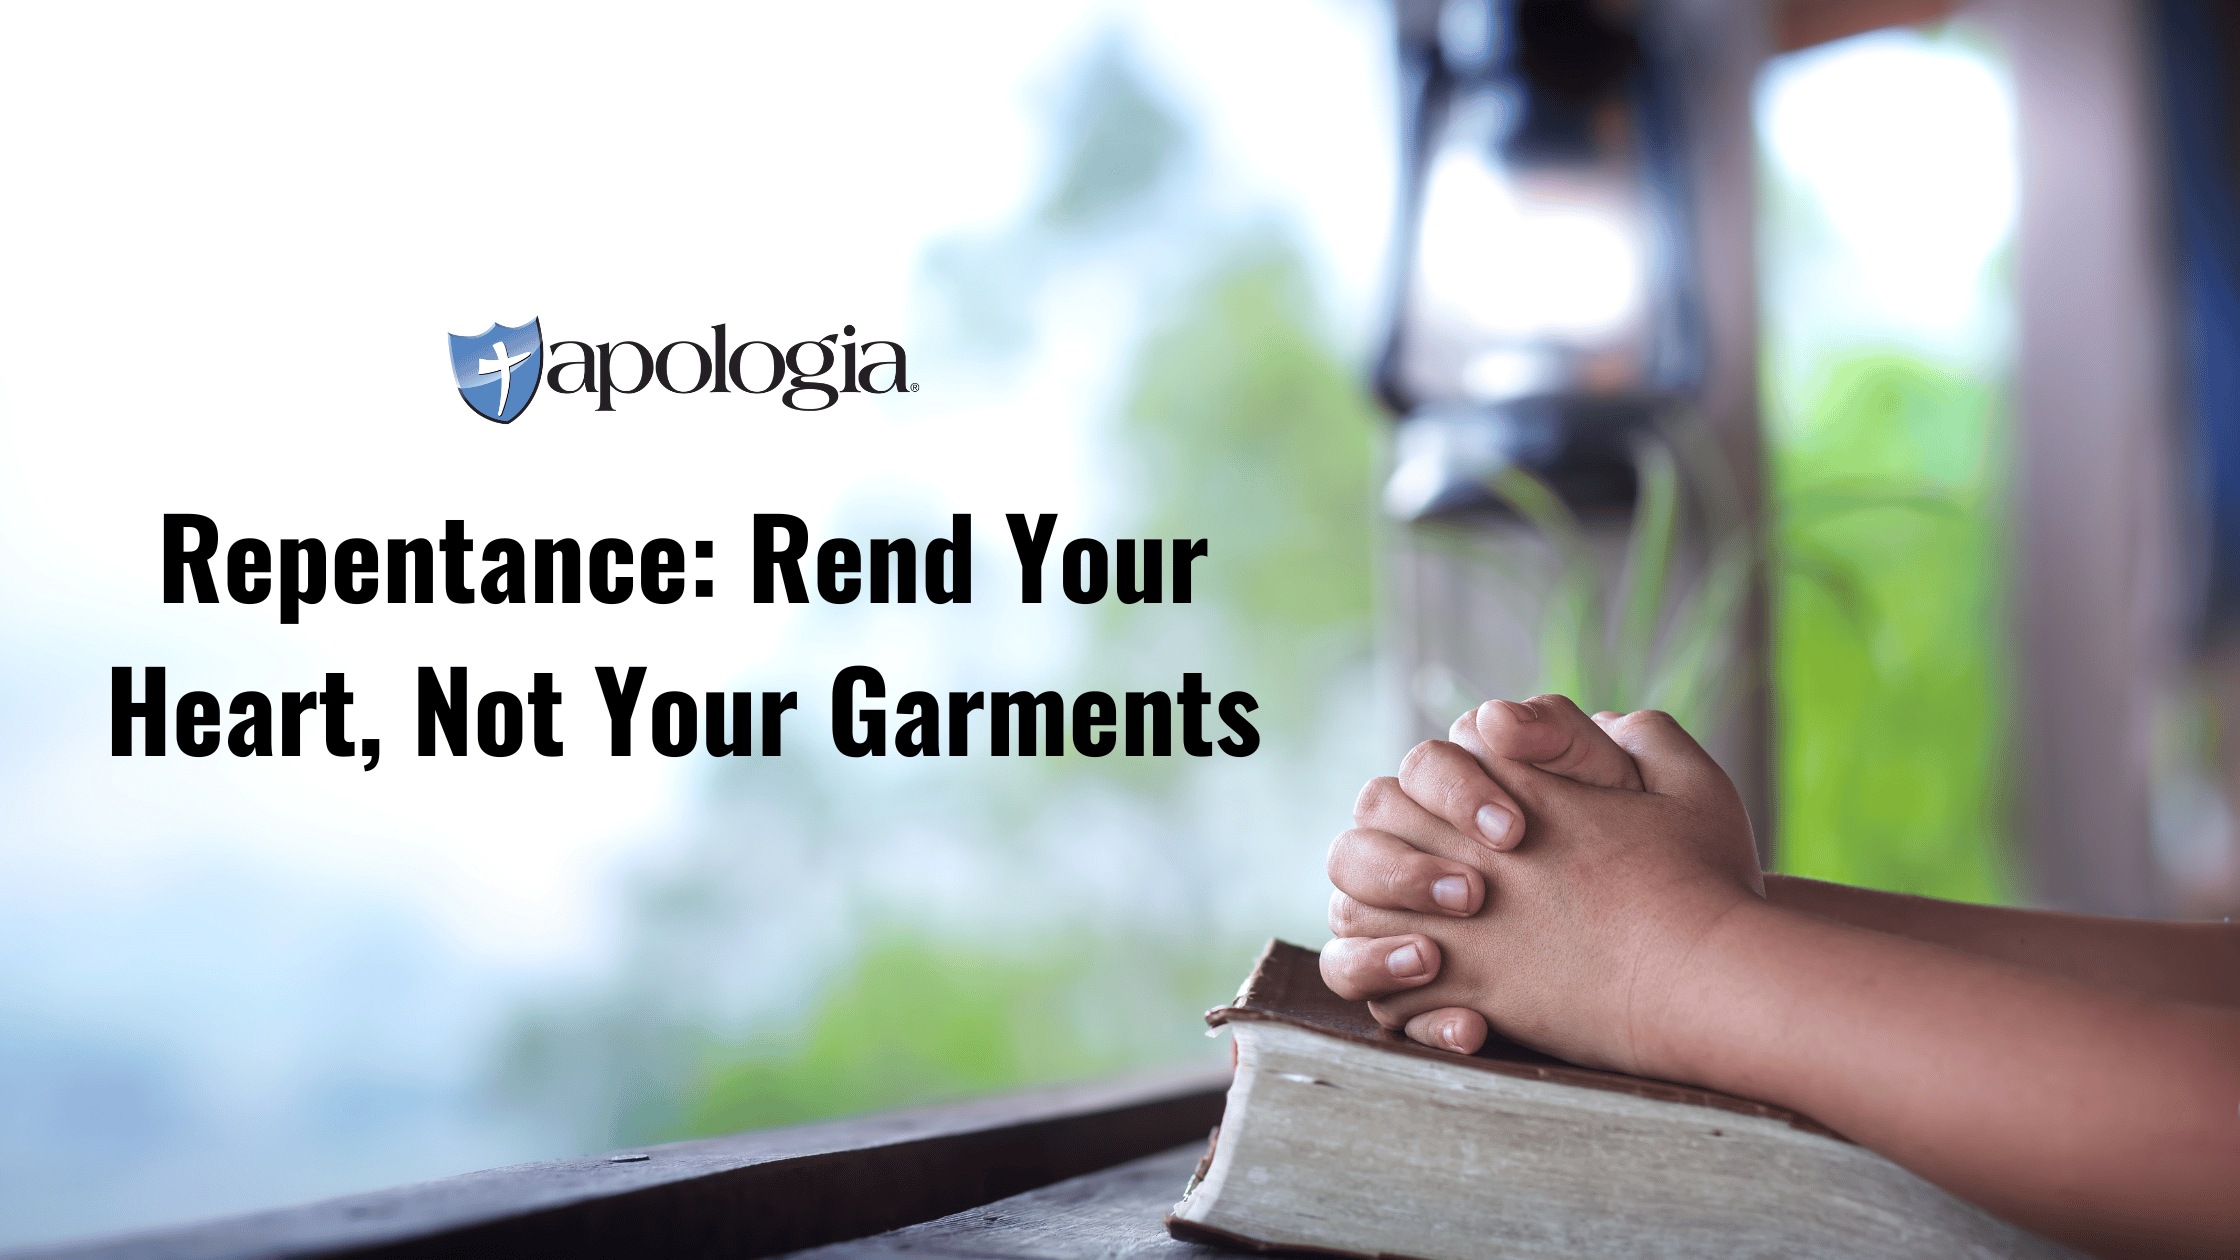 Repentance: Rend Your Heart, Not Your Garments